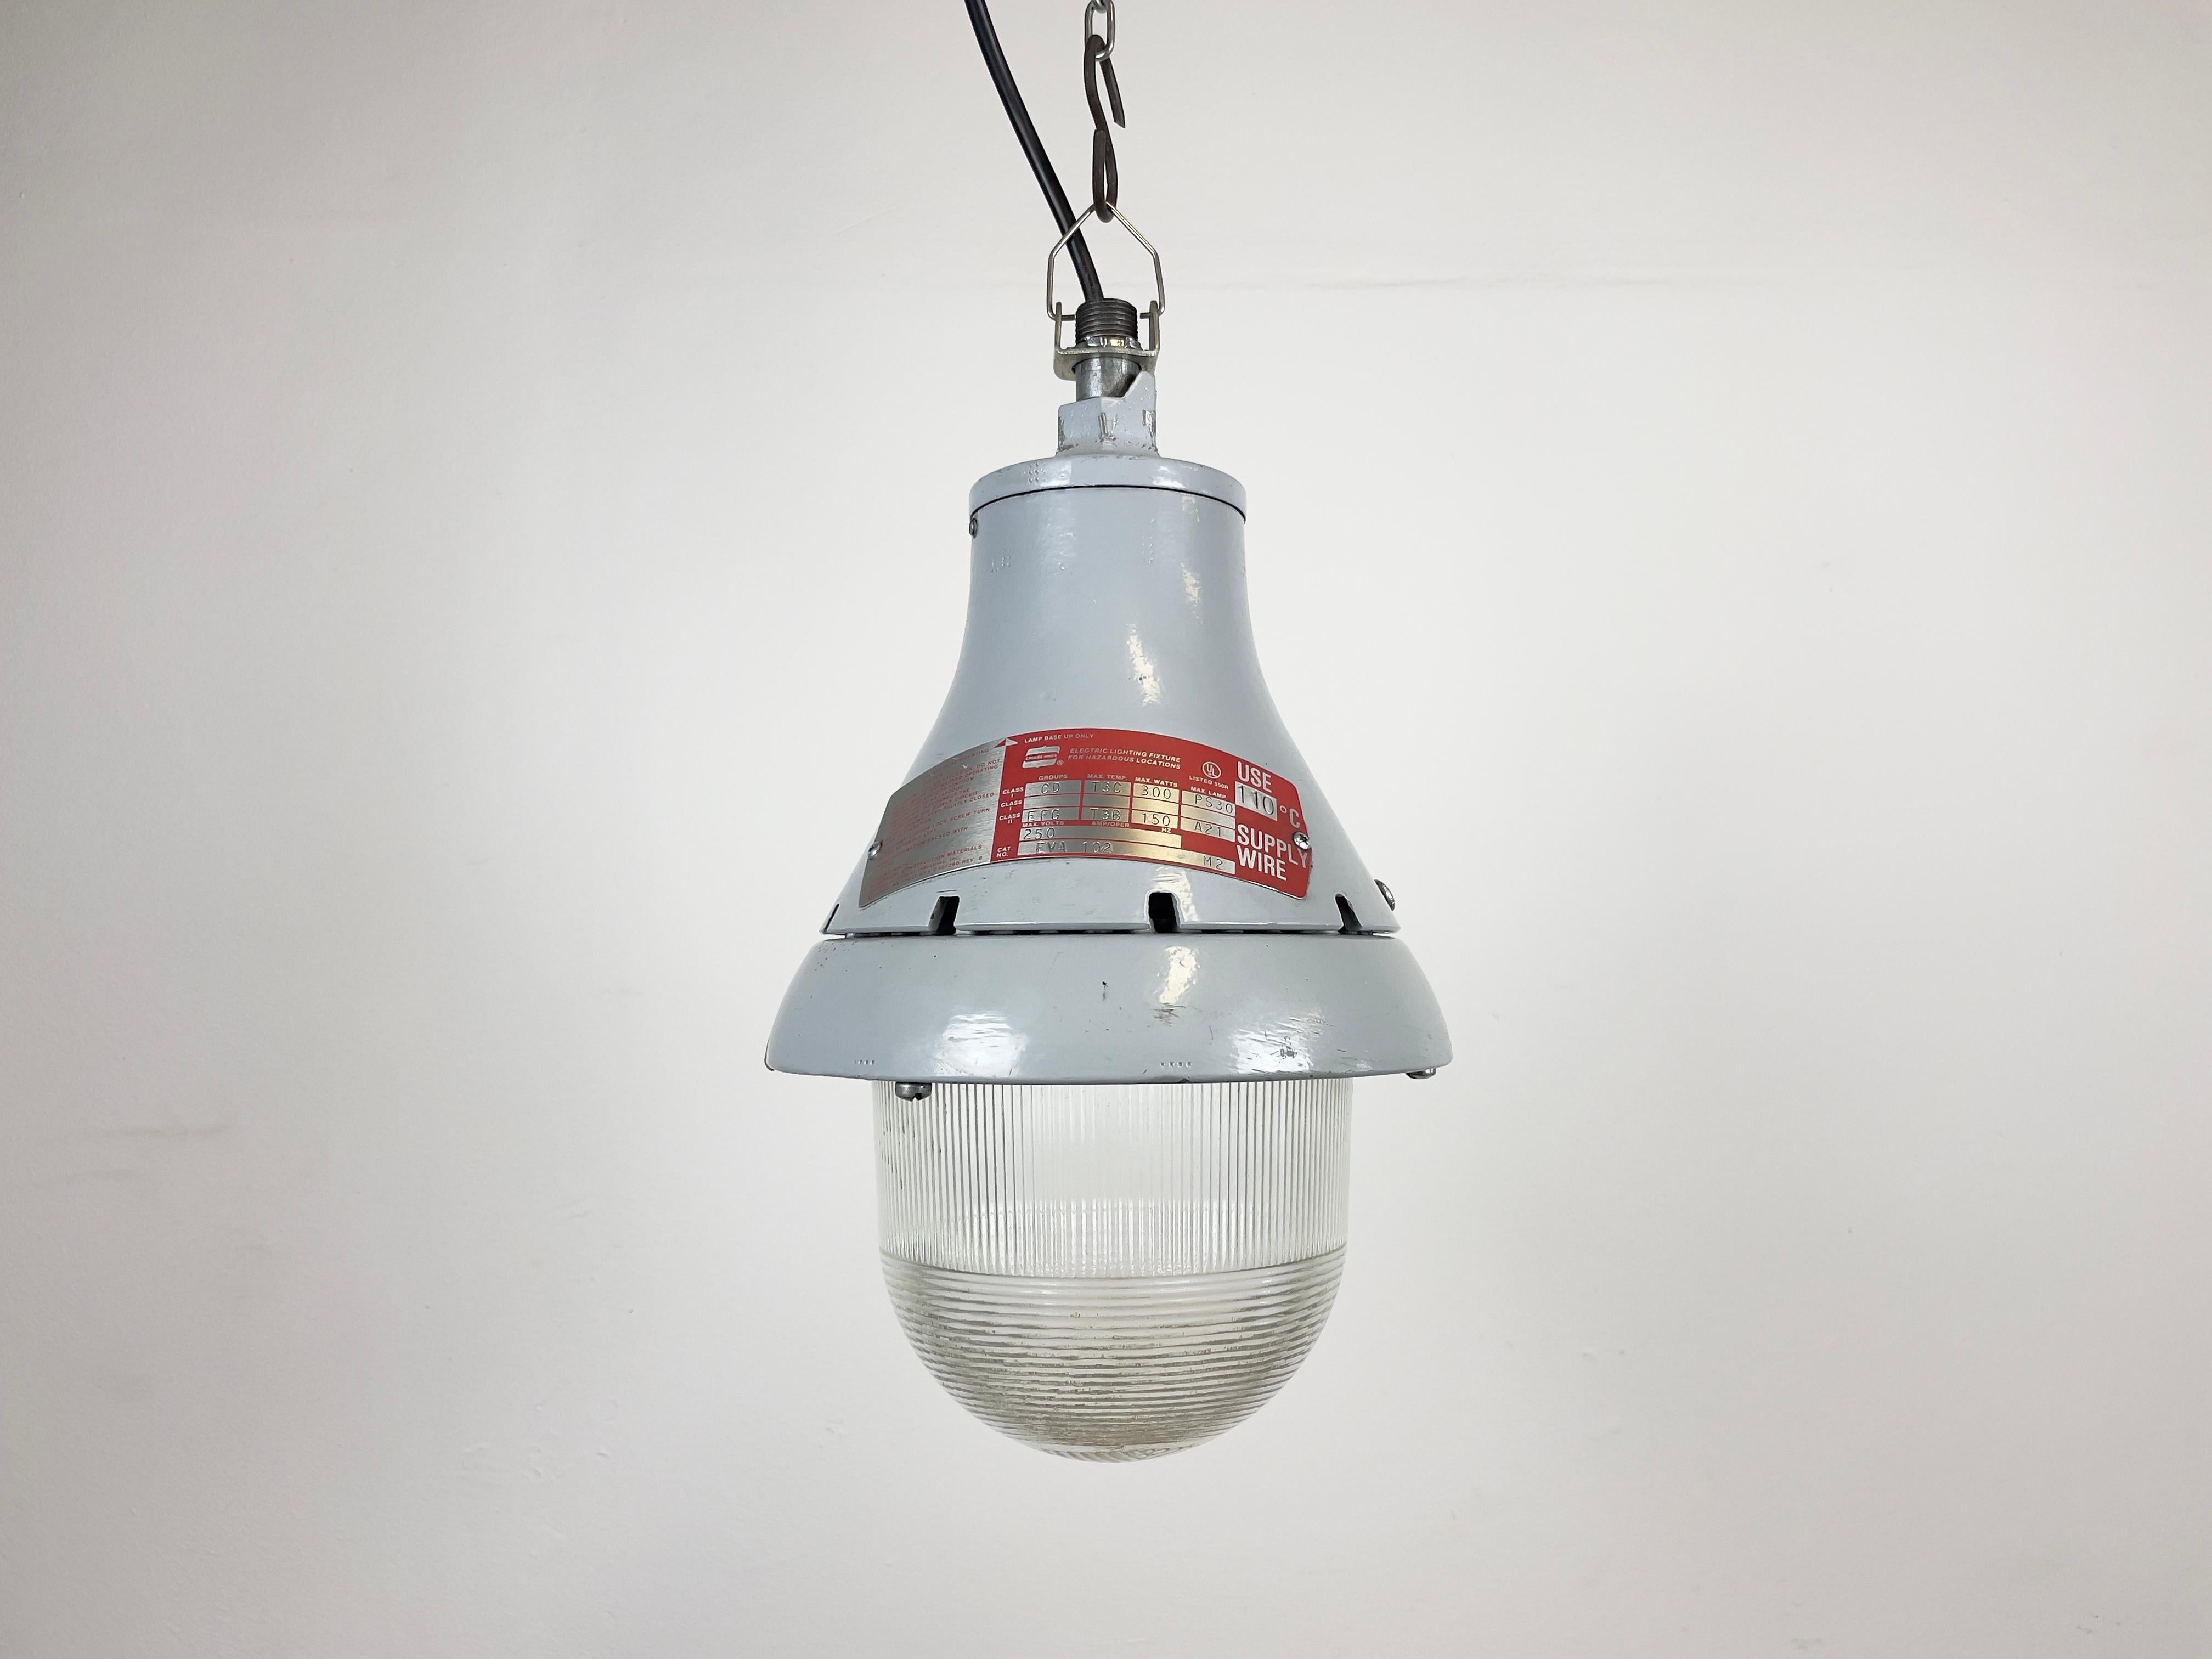 Industrial explosion proof light made by Crouse-Hinds in United States during the 1970s. It features a cast aluminium body and striped clear glass cover. The original socket requires E27/ E26 light bulbs.The weight of the lamp is 5 kg. New wire.